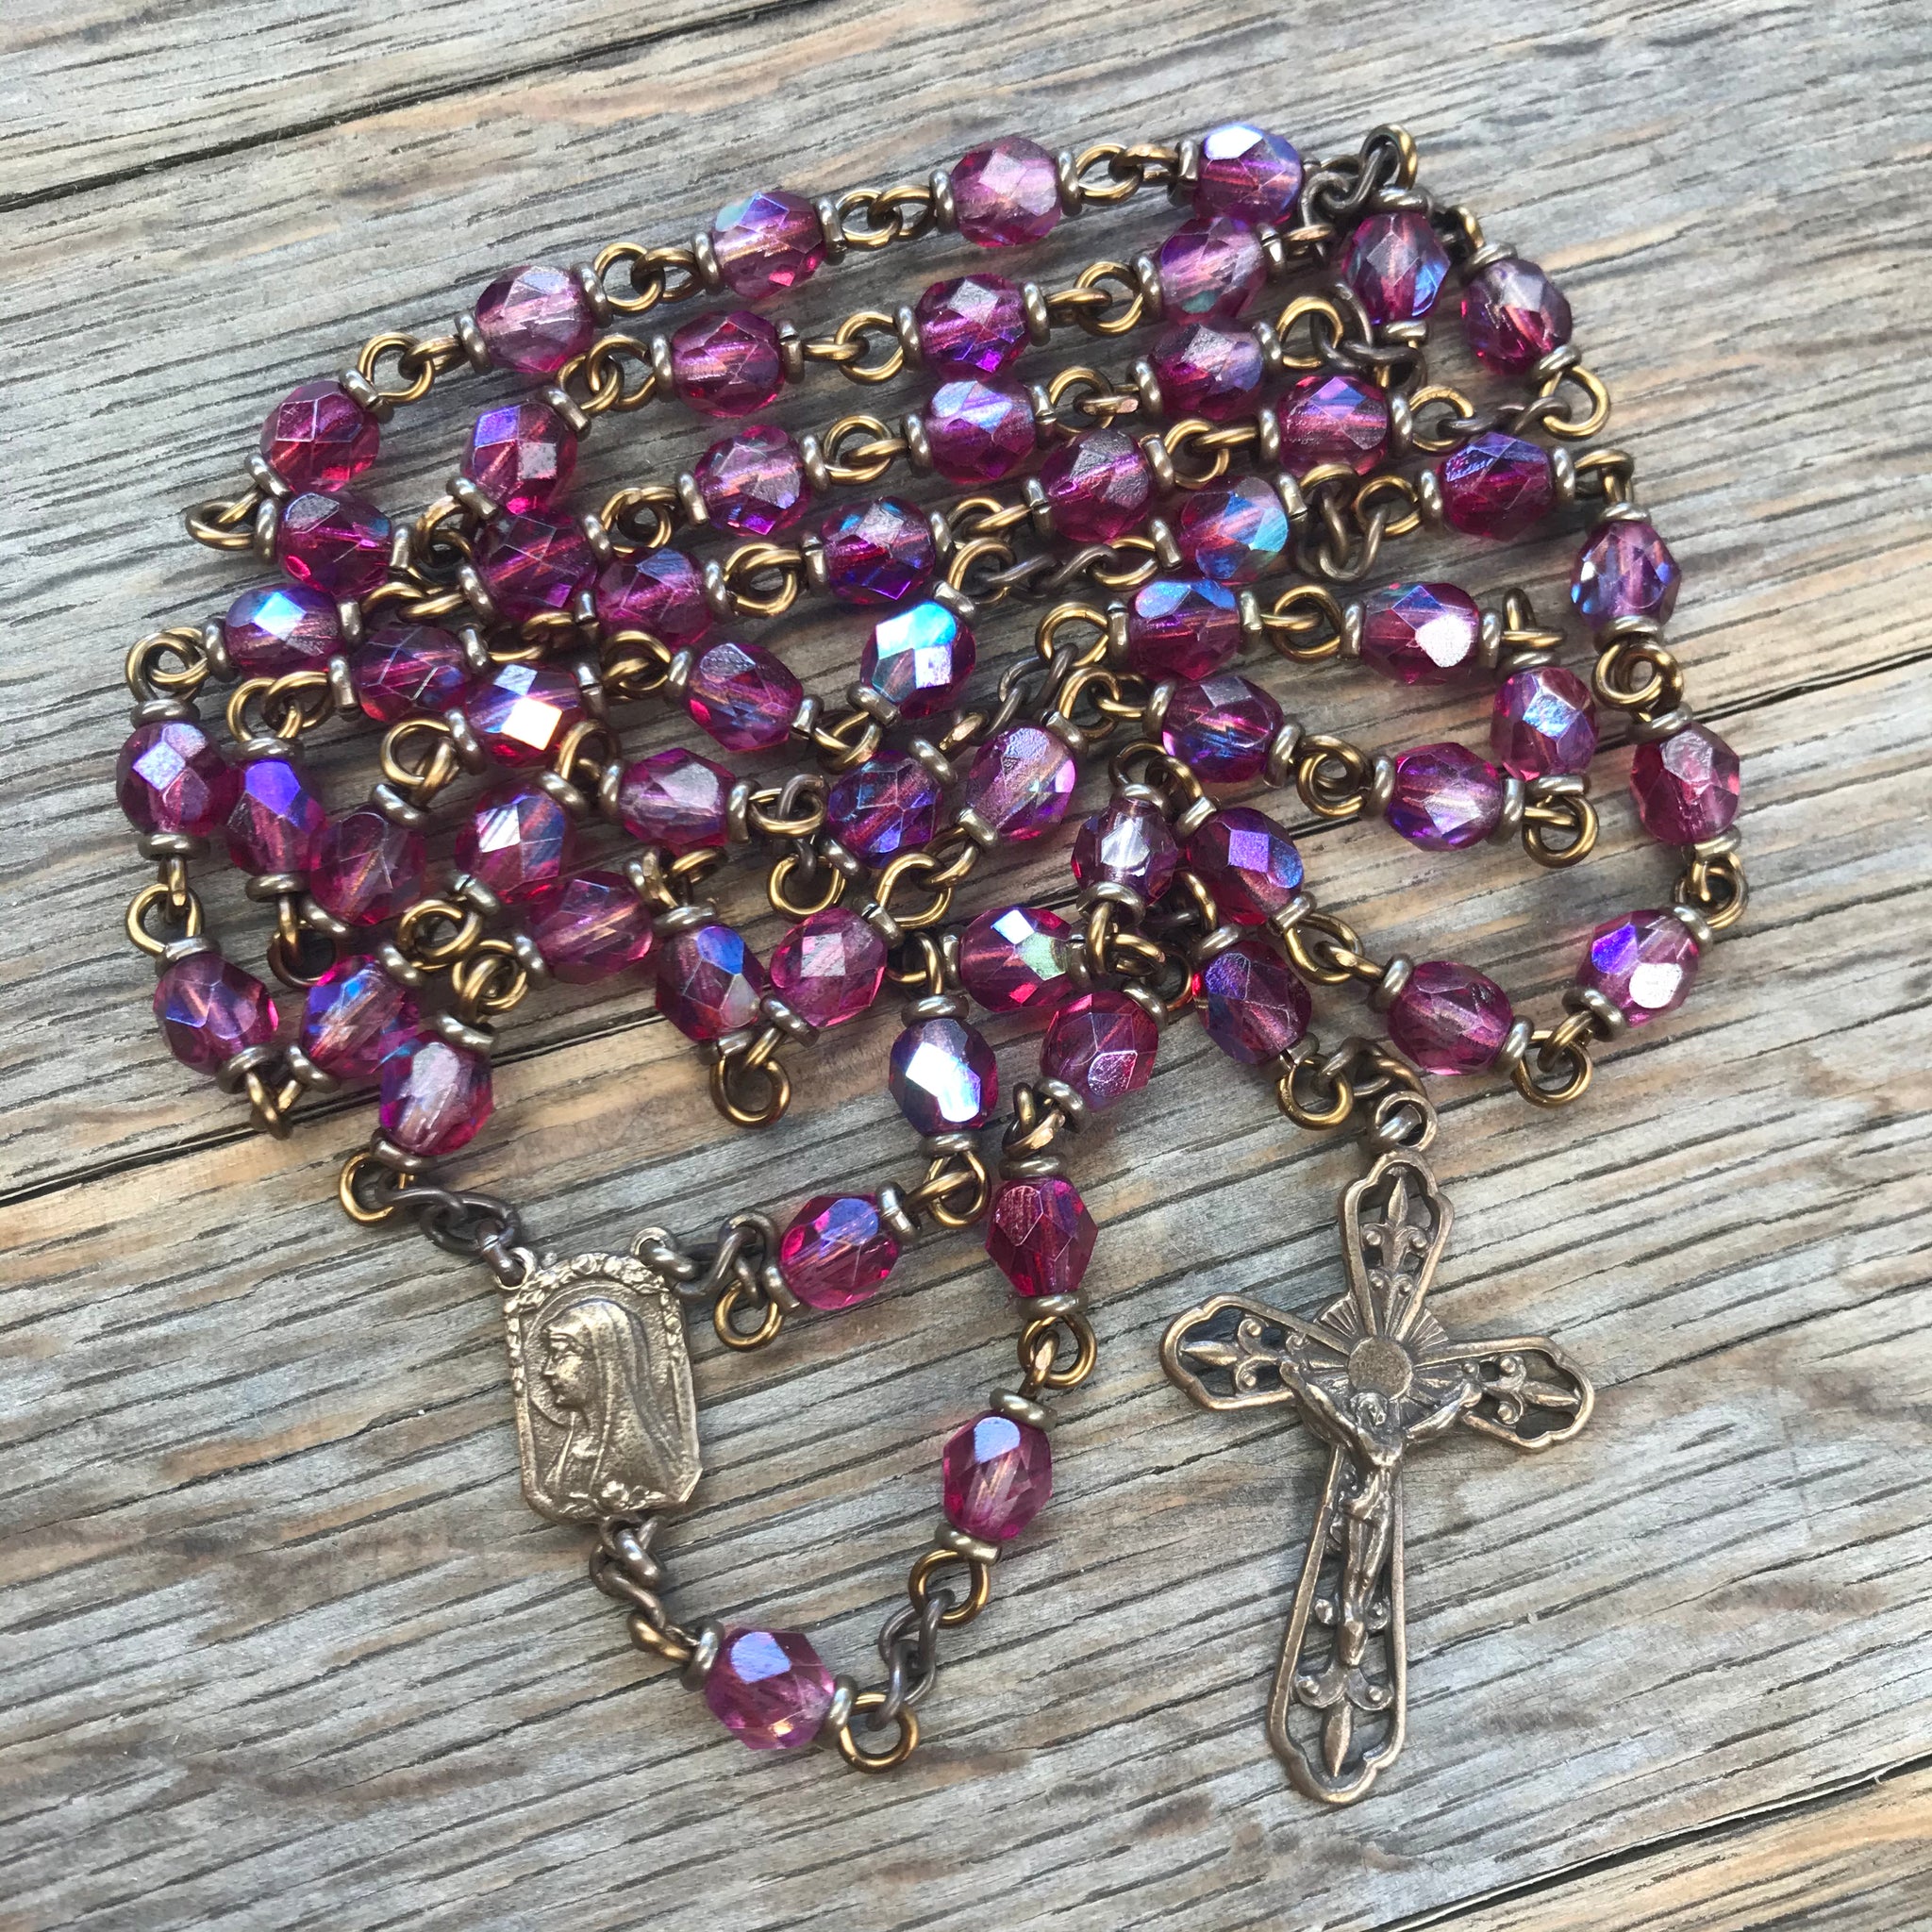 Our Lady of Lourdes Heirloom Rosary